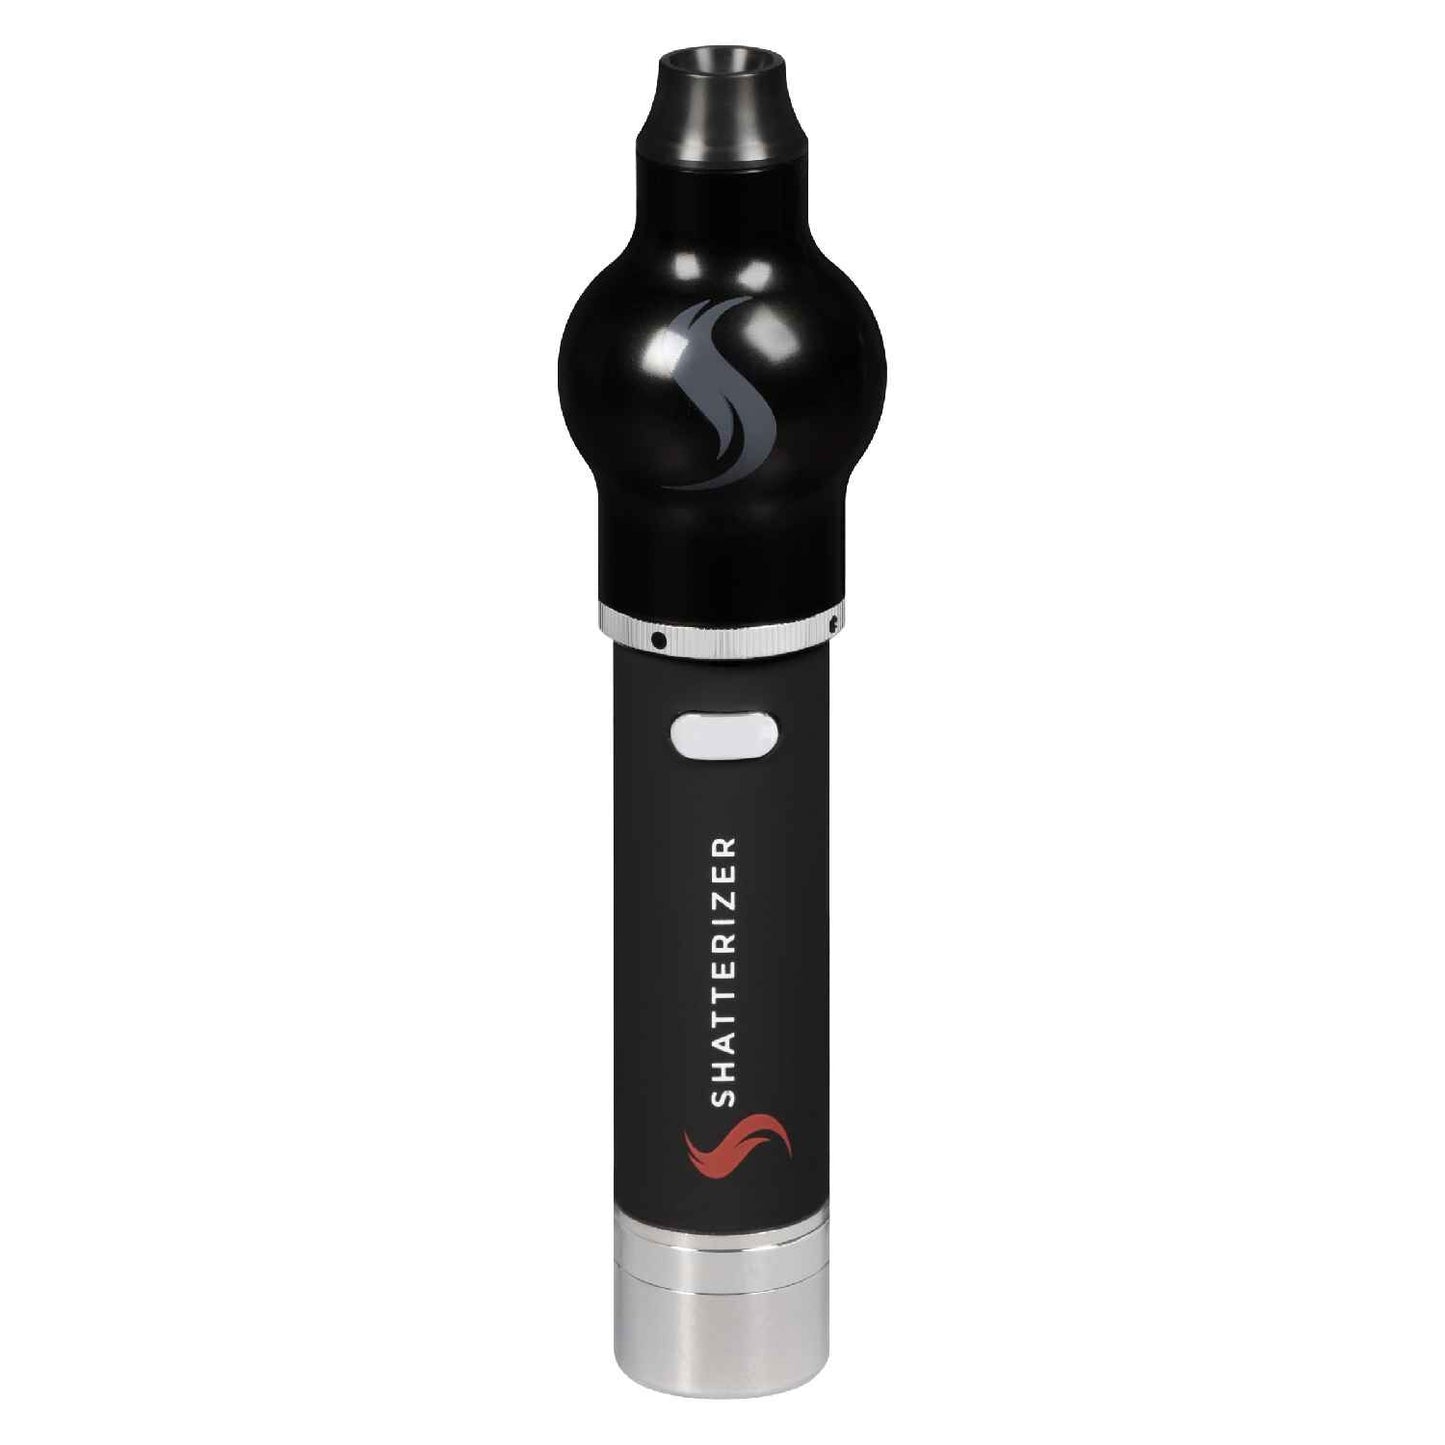 Shatterizer - Concentrate Vaporizer